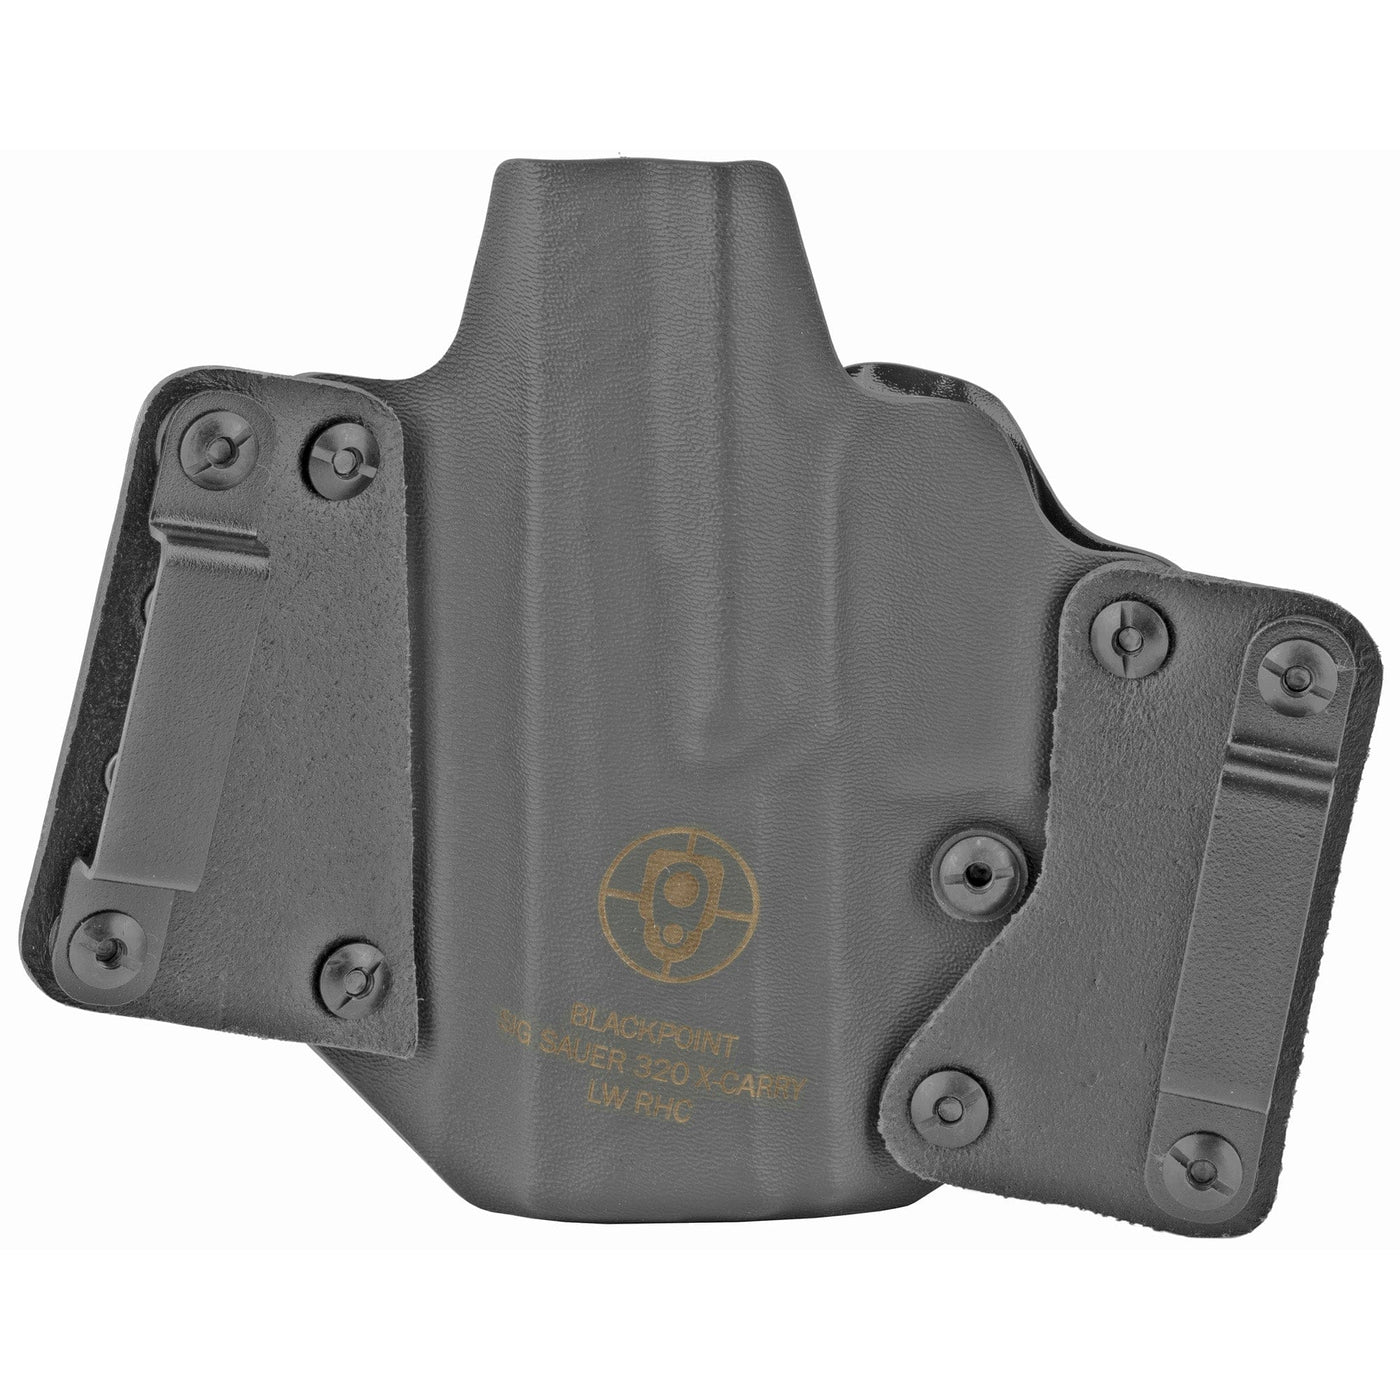 BlackPoint Tactical Blk Pnt Lthr Wing P320 X-carry Rh Bk Holsters